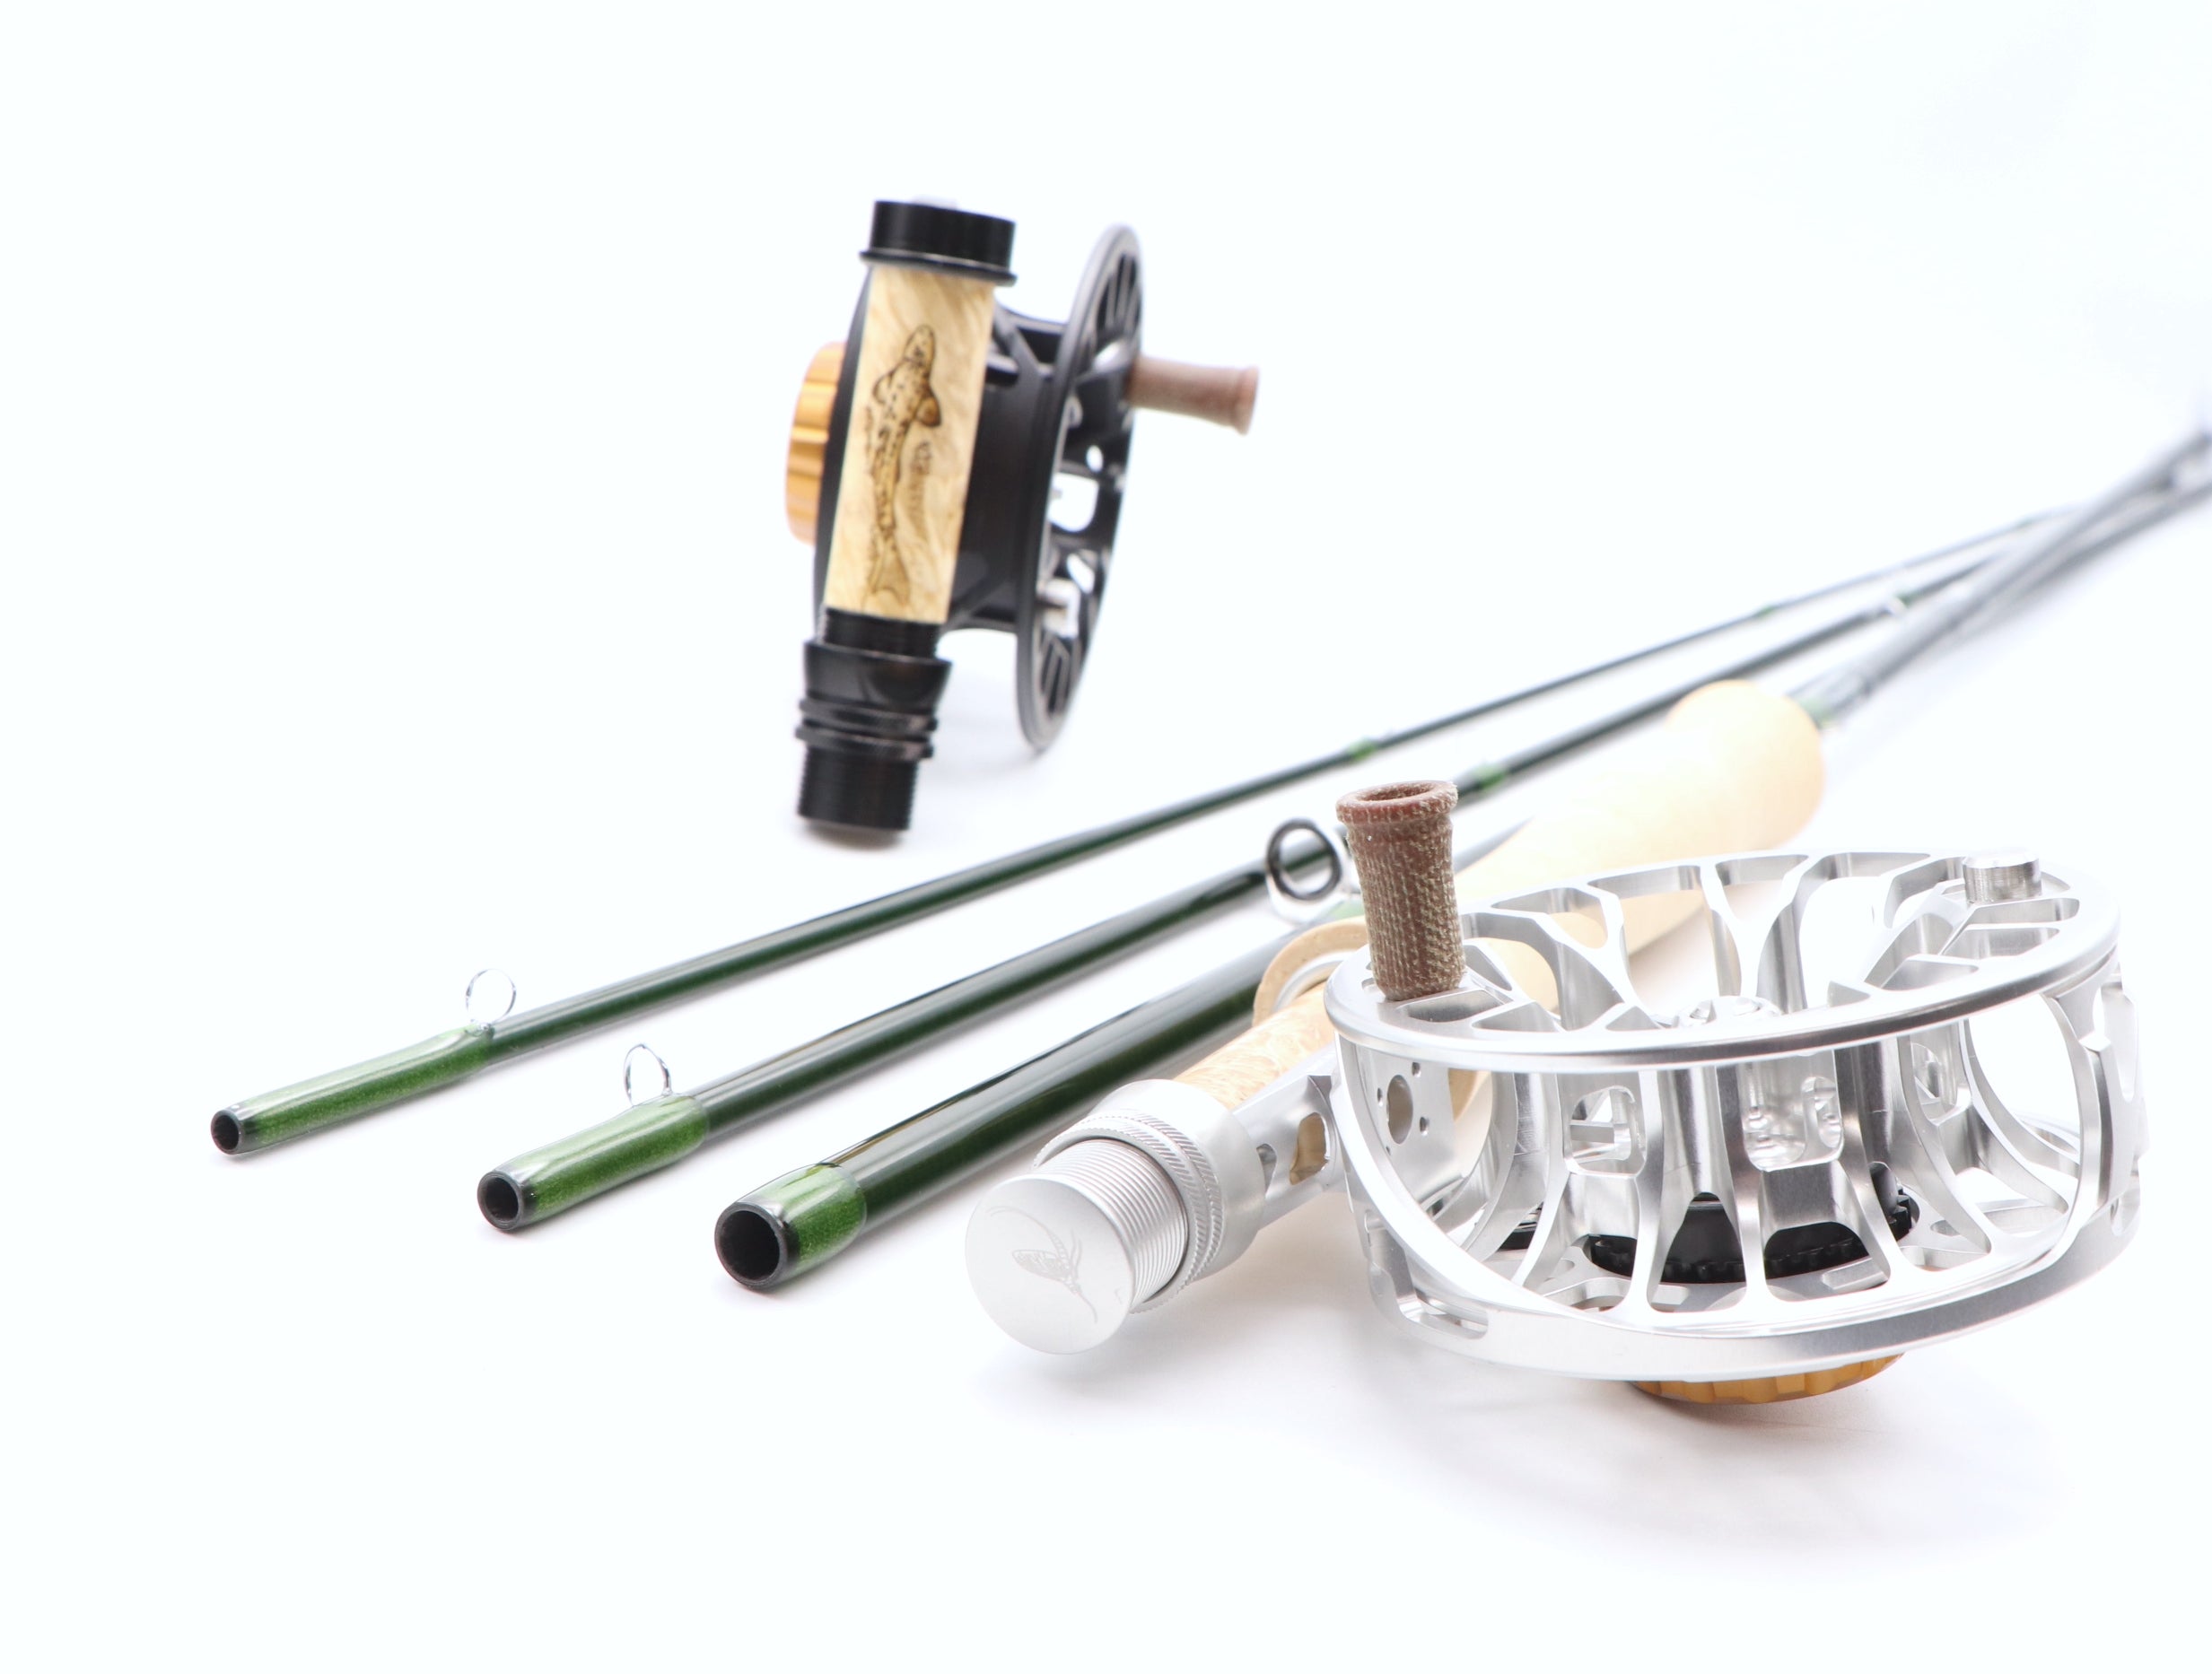 Coherence Fly Rod 4,5,6, model for freshwater, 4 piece Medium Fast – JP  Ross Fly Rods & Co. Outdoors